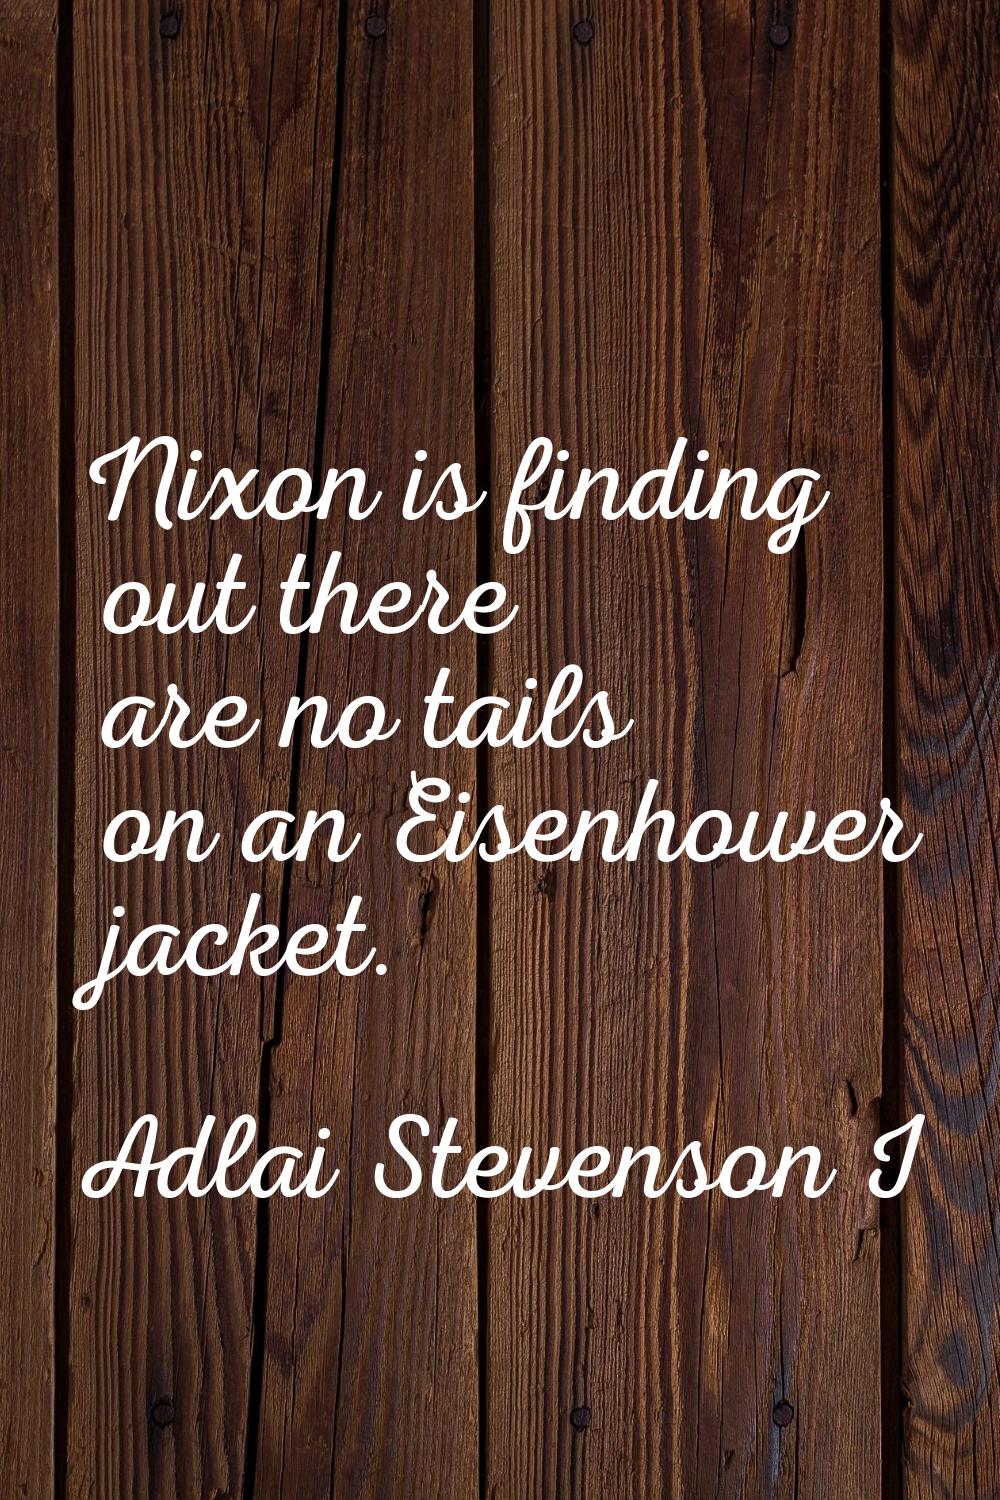 Nixon is finding out there are no tails on an Eisenhower jacket.